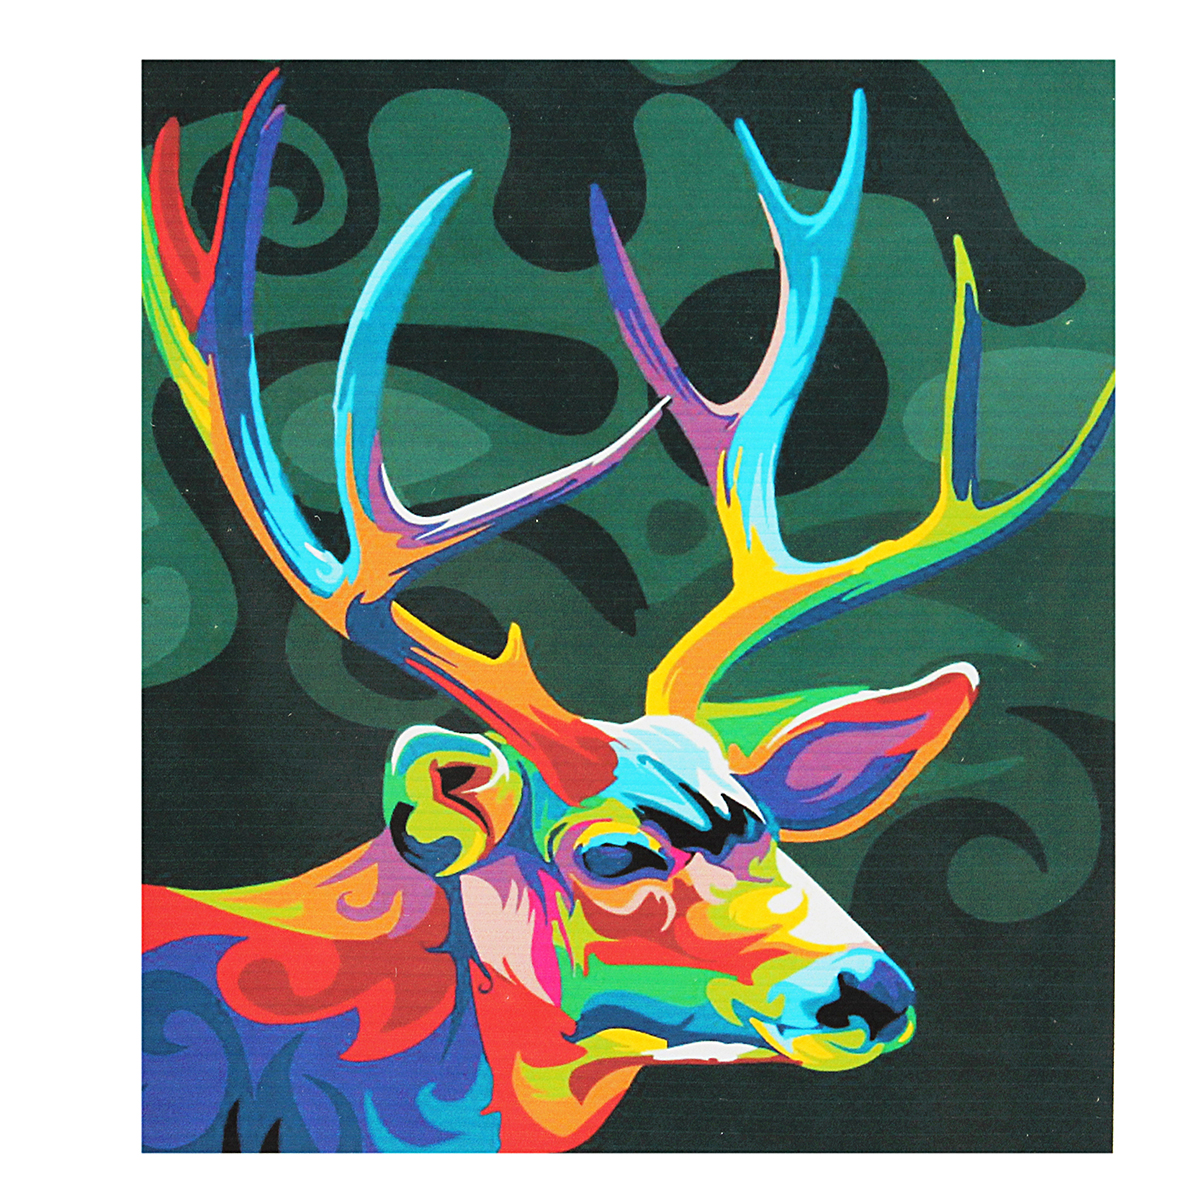 Multicolor-Deer-Oil-Painting-Set-By-Number-Kit-DIY-Pigment-Painting-Art-Hand-Craft-Tool-1733486-1